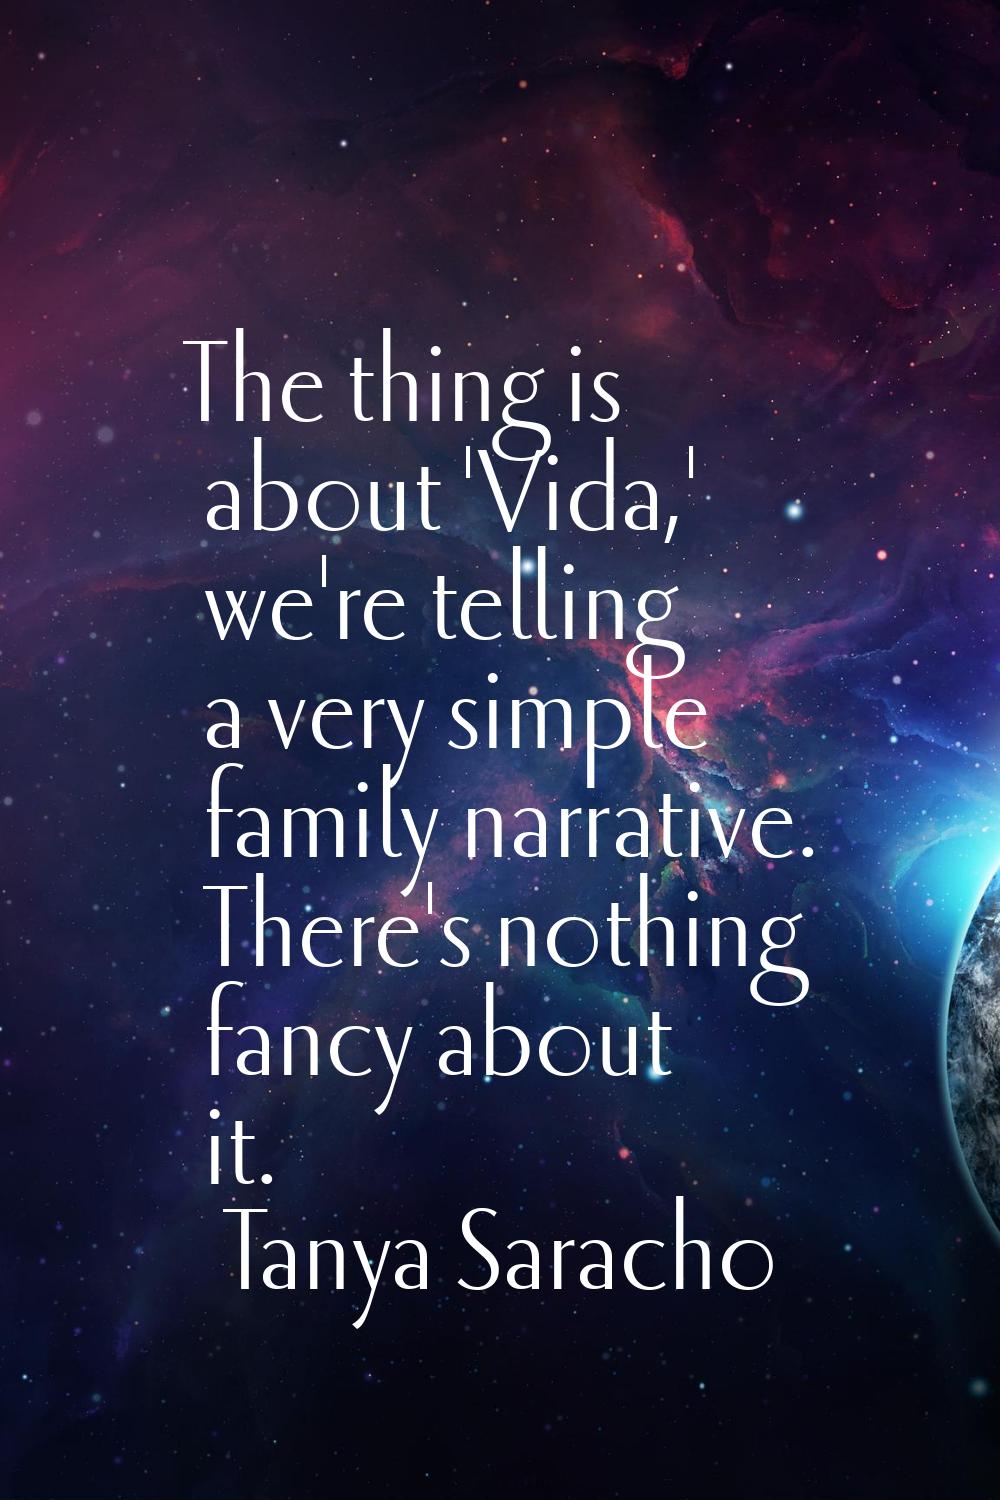 The thing is about 'Vida,' we're telling a very simple family narrative. There's nothing fancy abou